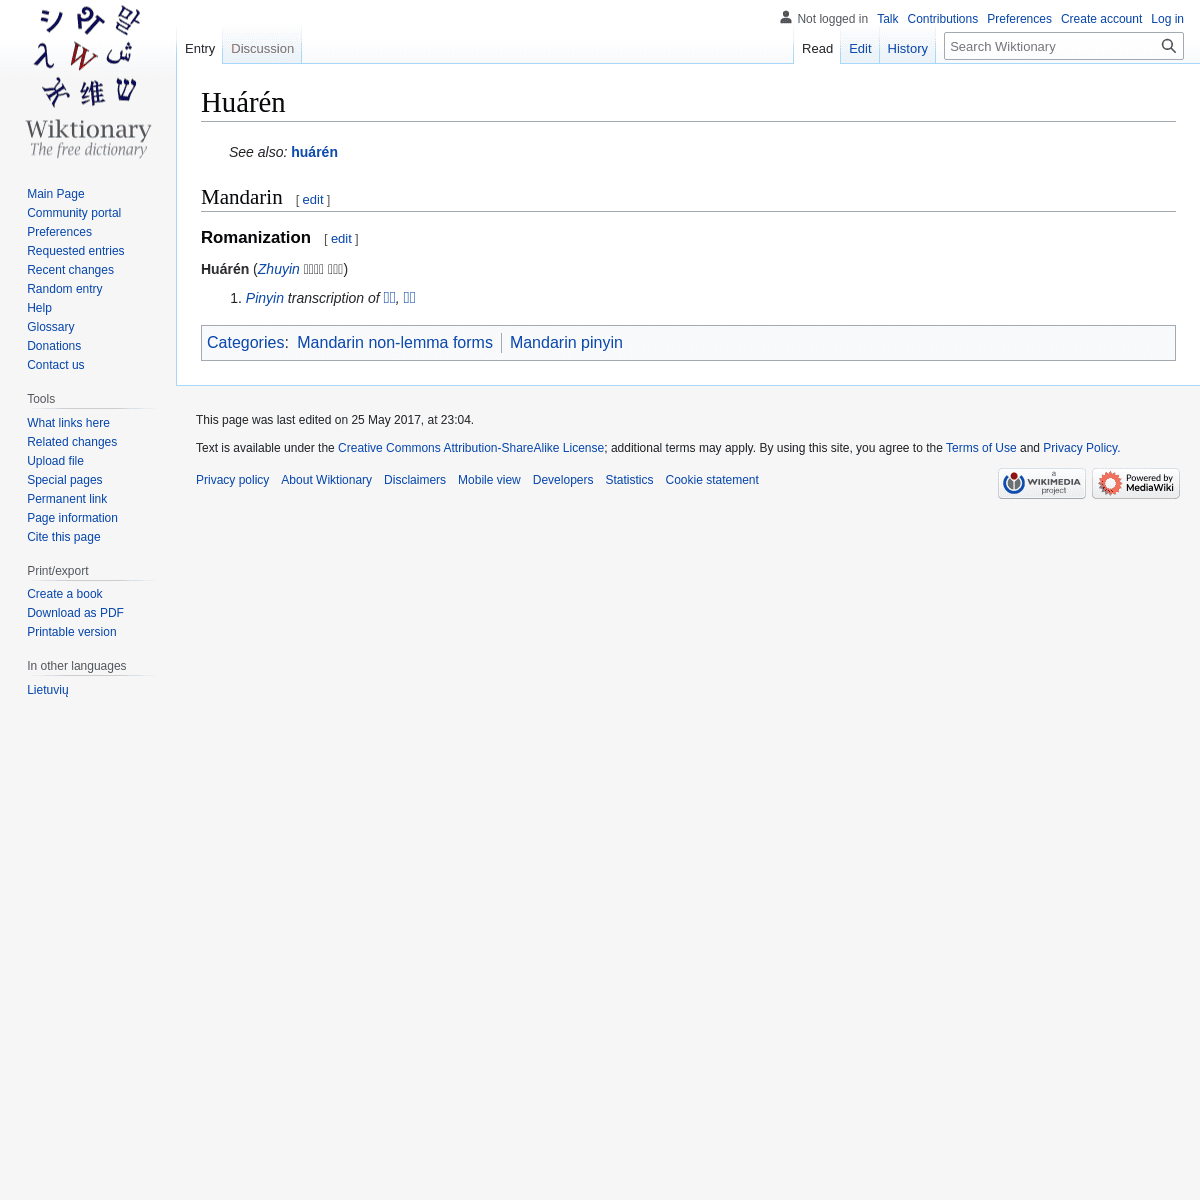 A complete backup of https://en.wiktionary.org/wiki/Hu%C3%A1r%C3%A9n